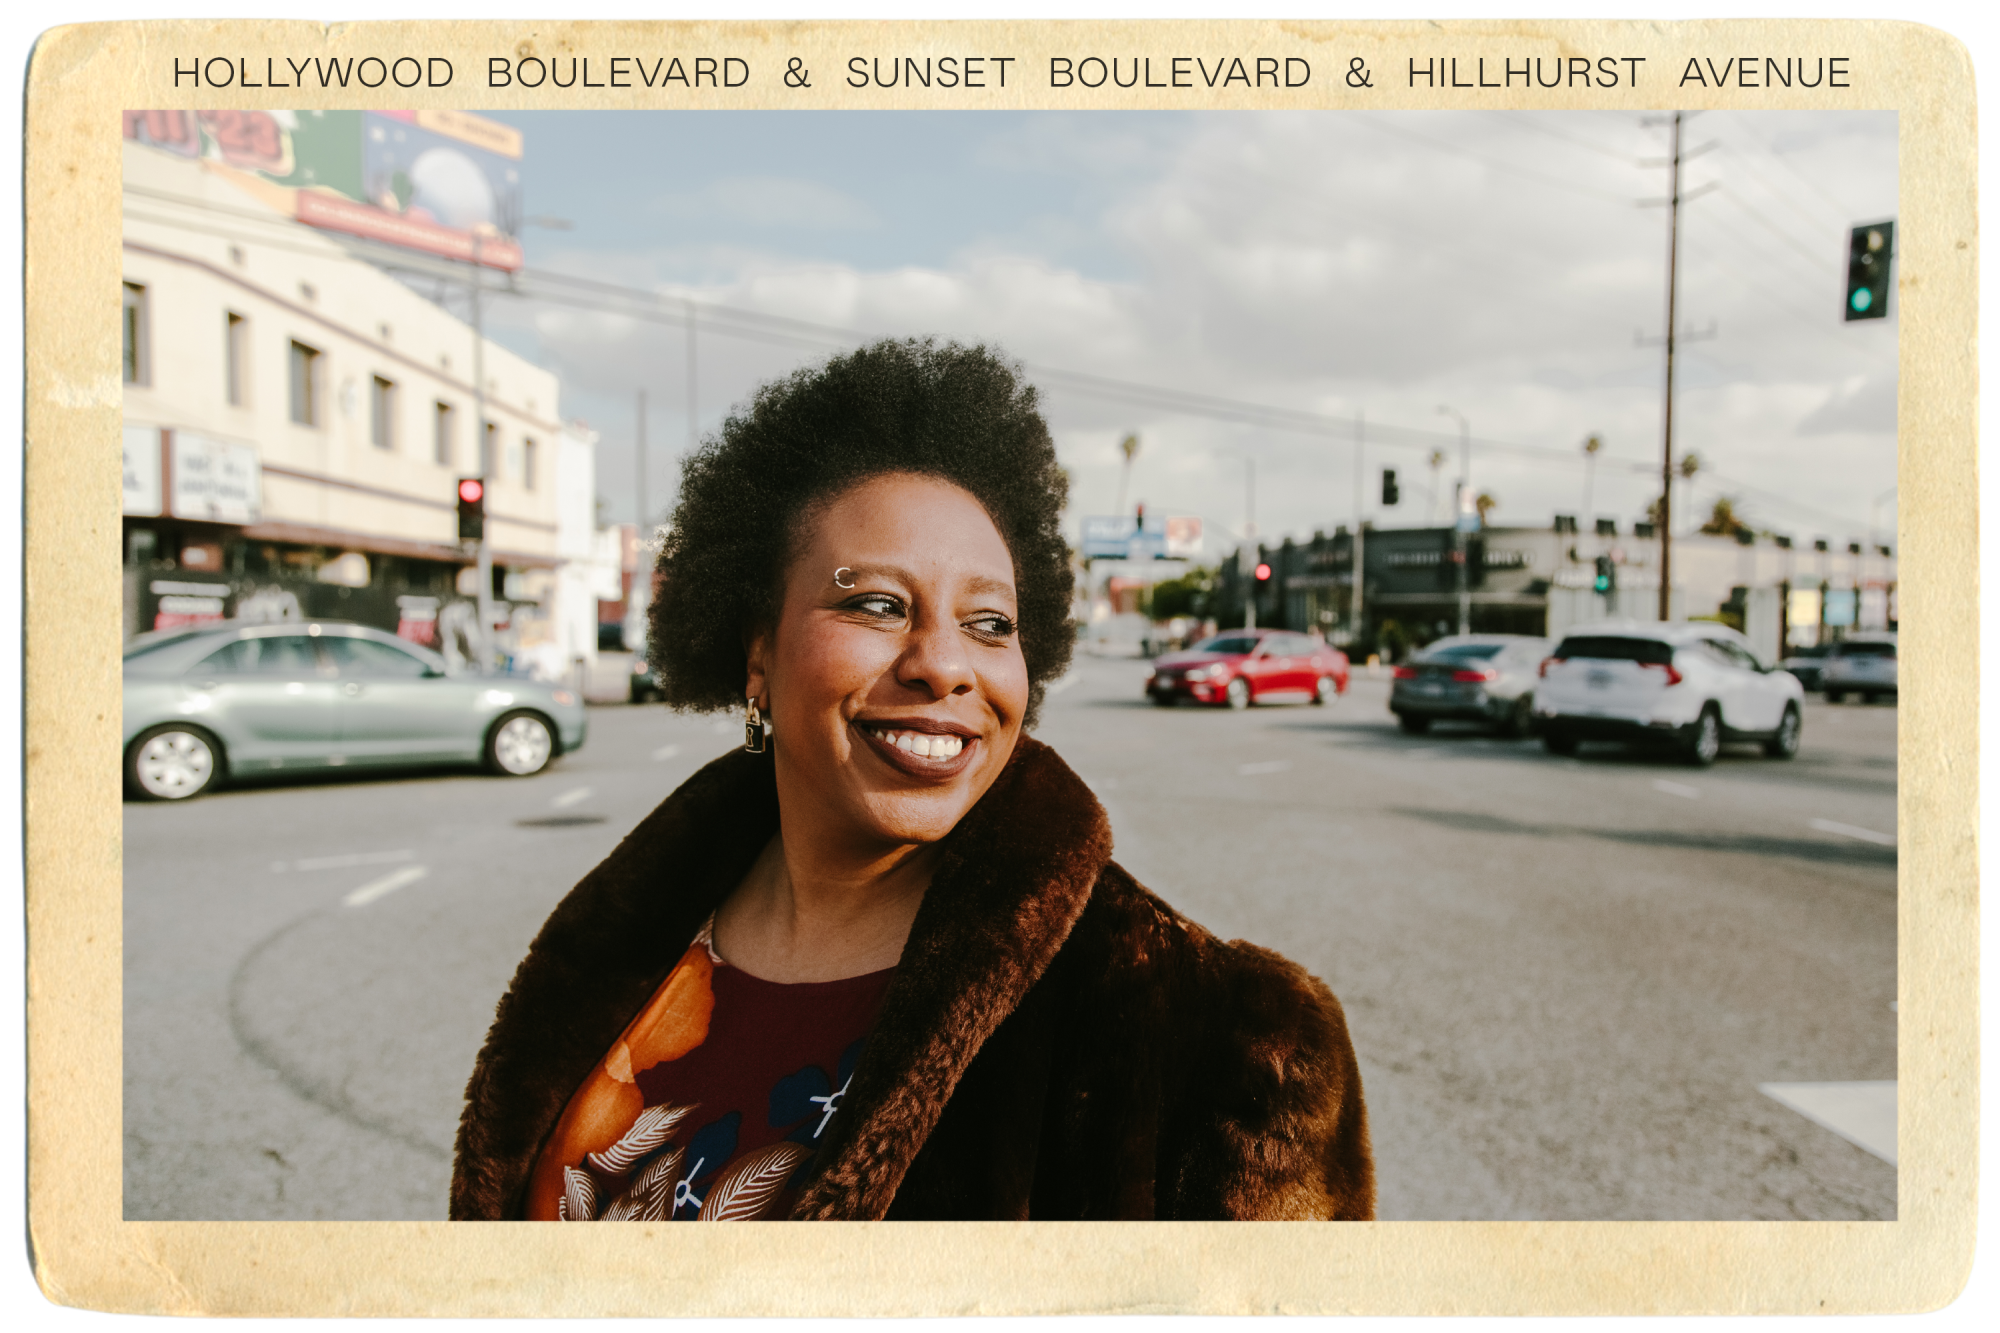 Morgan Parker smiling in vintage coat at intersection of Hollywood, Sunset and Hillhurst